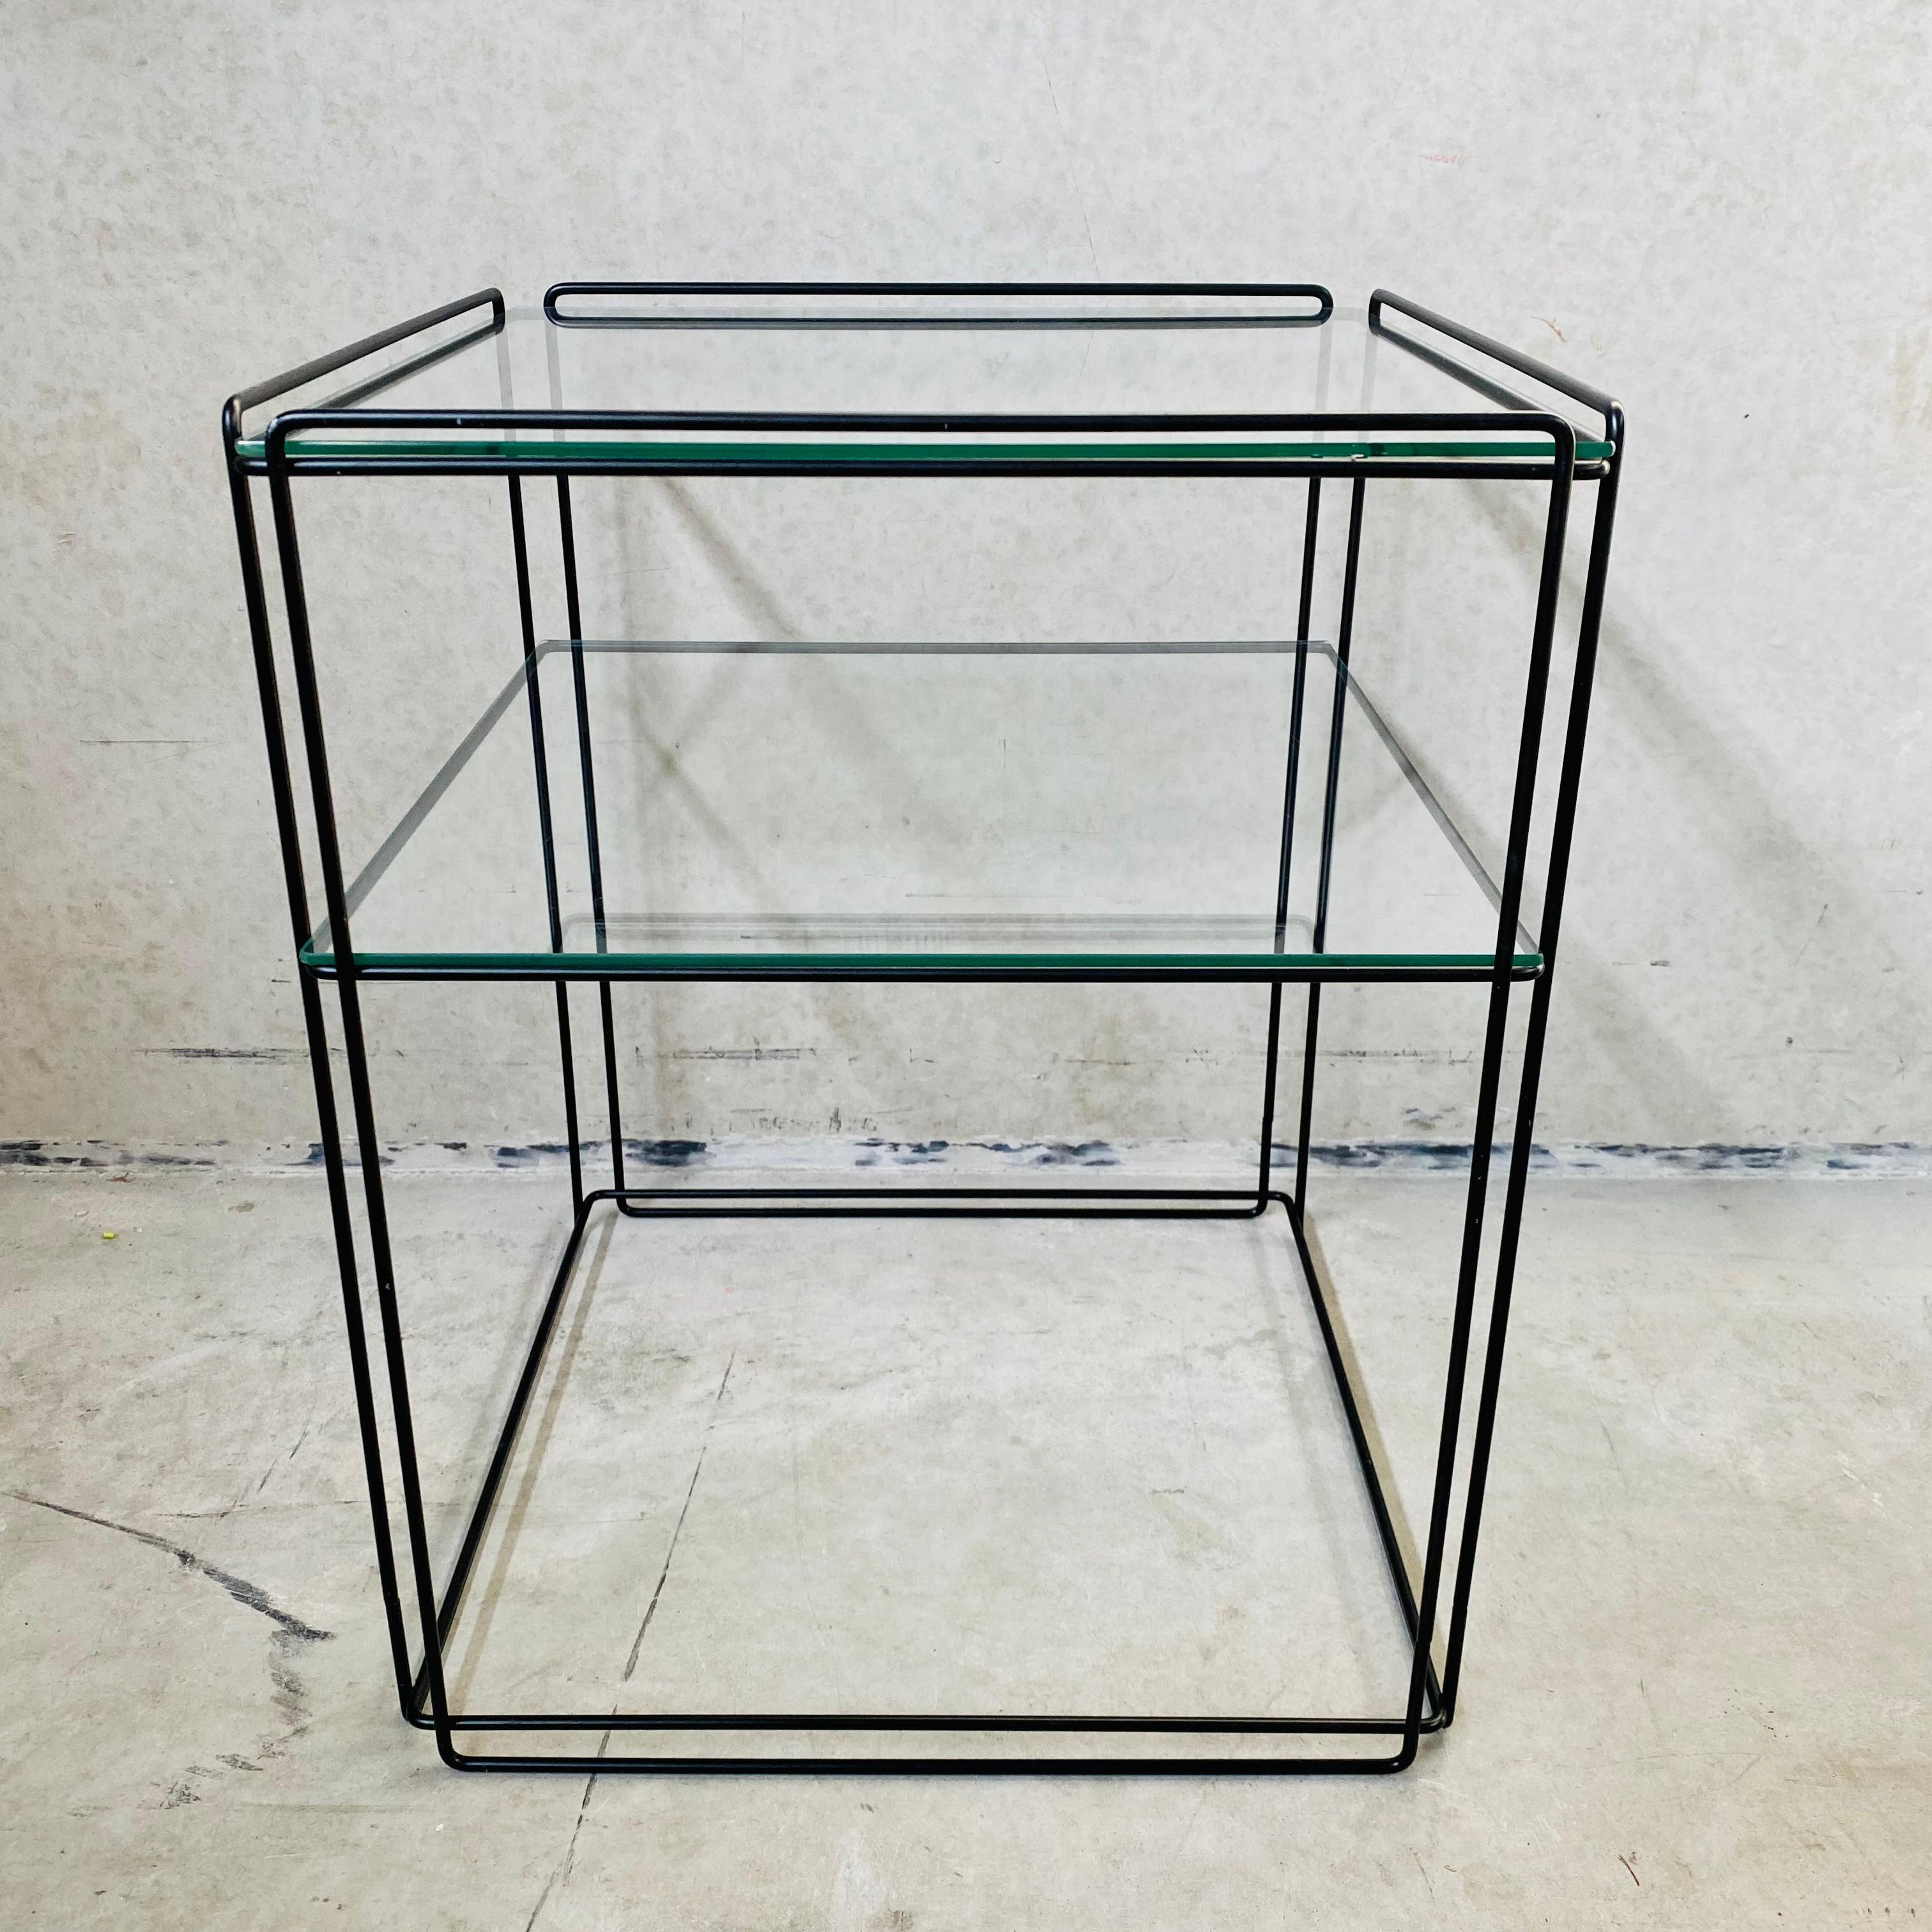 MAX SAUZE FOR ATROW ' ISOCELE' SIDE TABLE, 1970'S
This graphical side table, model 'Isocele', was designed by Max Sauze in France in the 1970's. It has a black enameled steel frame with 2 glass plates. A beautifil design that gives an airy effect